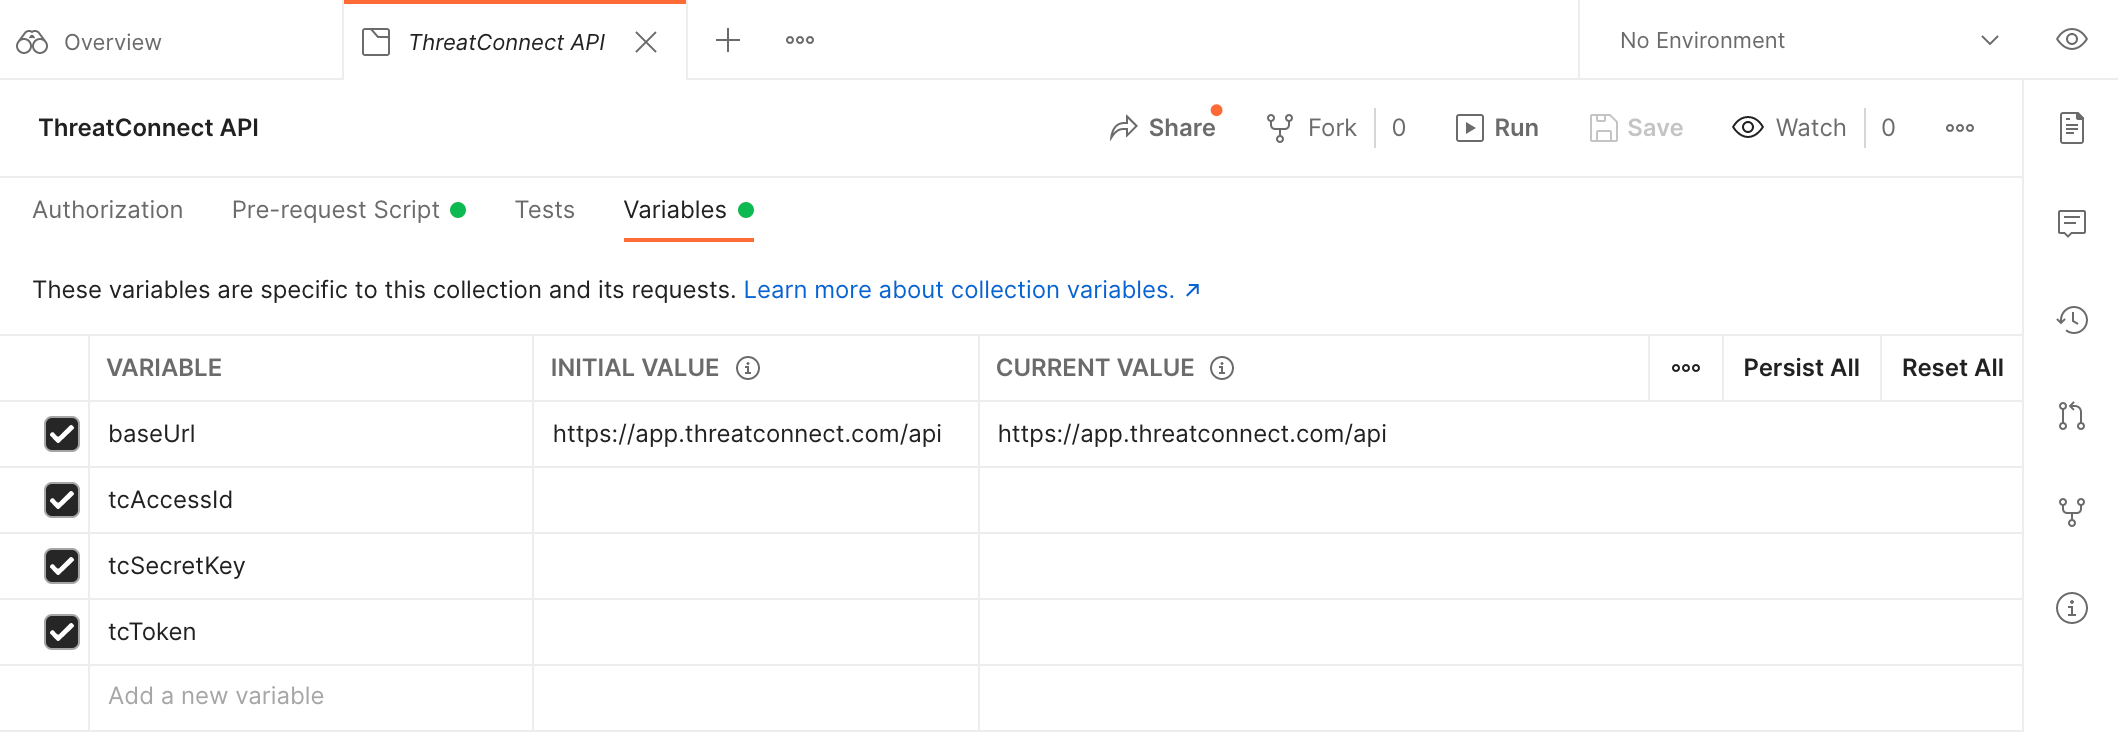 Variables subtab of ThreatConnect API in Postman